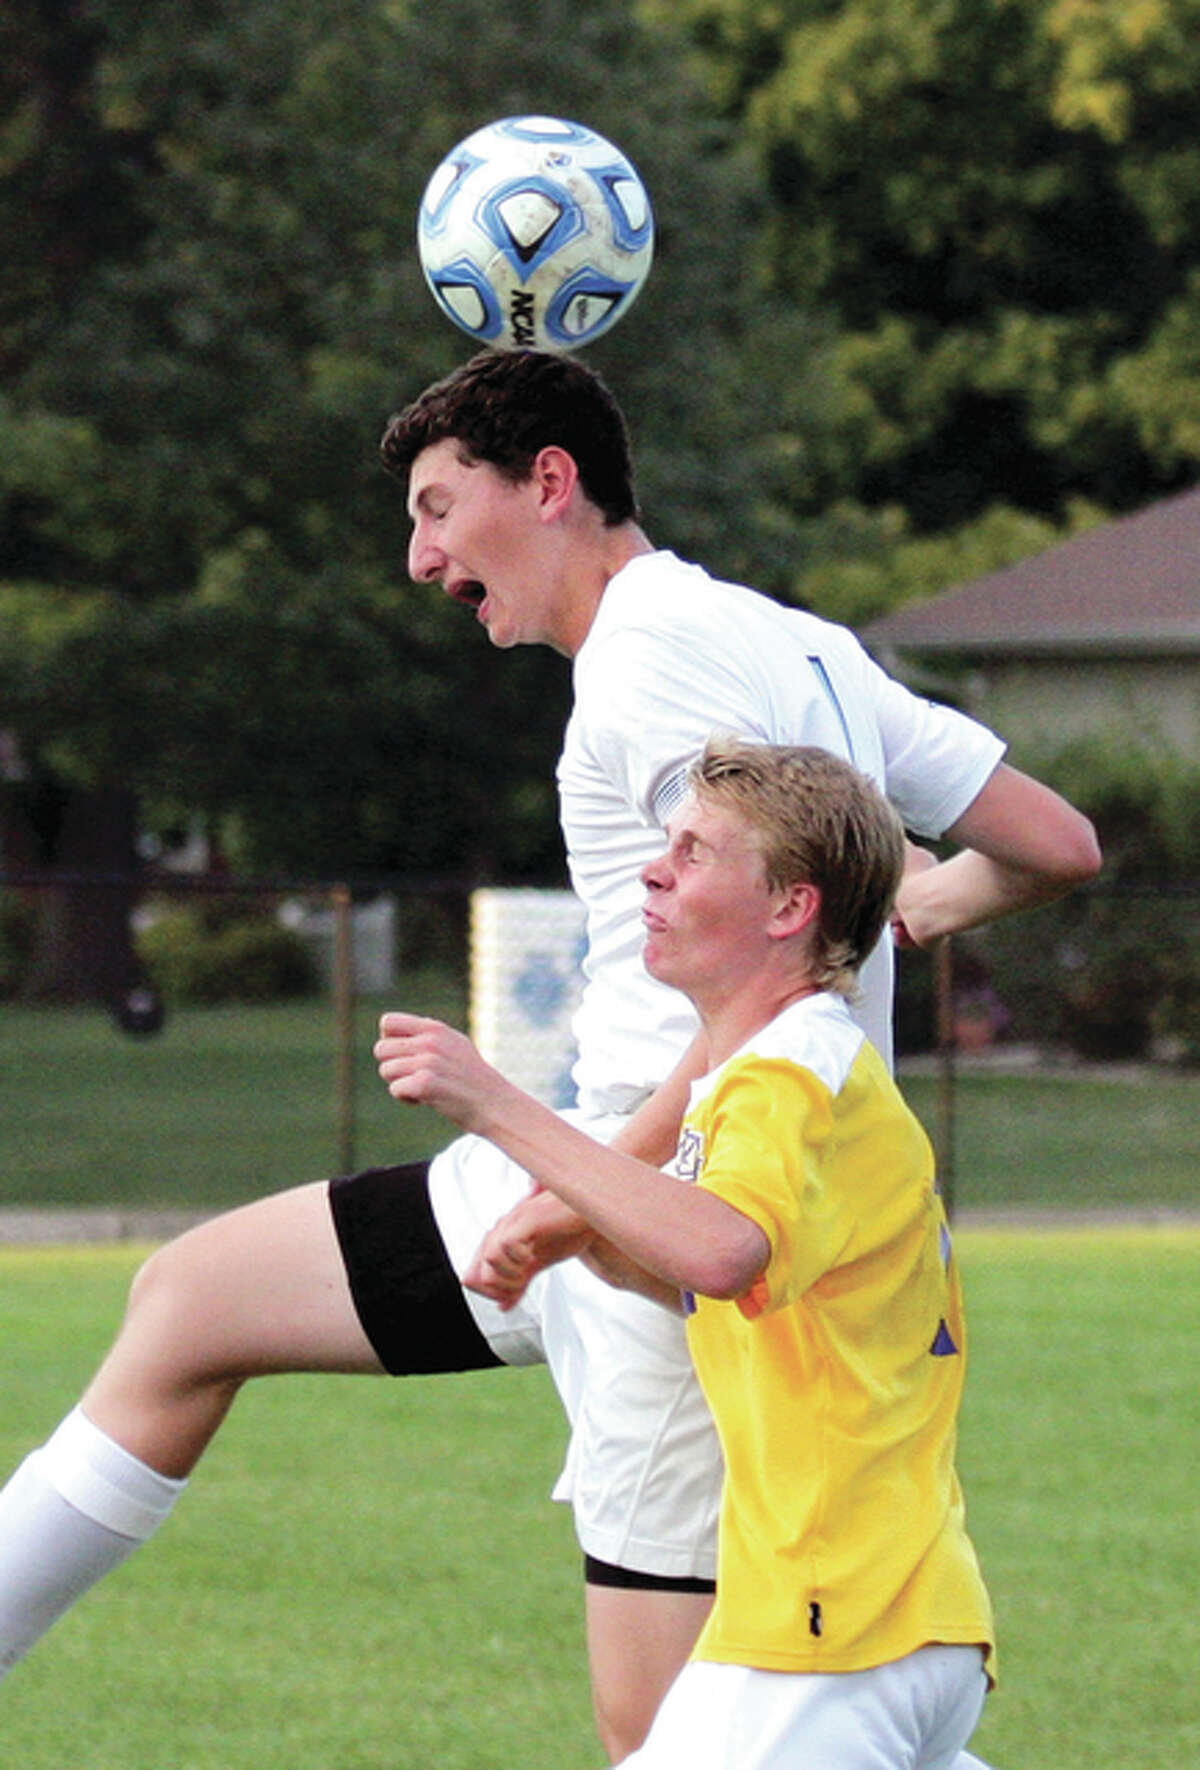 Jersey’s Drake Kanallakan (back) goes up to head the ball over Civic Memorial’s Trevor Panyik in a Panthers win Sept. 17 in Jerseyville. The Panthers were on the road Monday in Alton and picked up a 1-0 win over the Redbirds to extend their winning streak to five in a row.